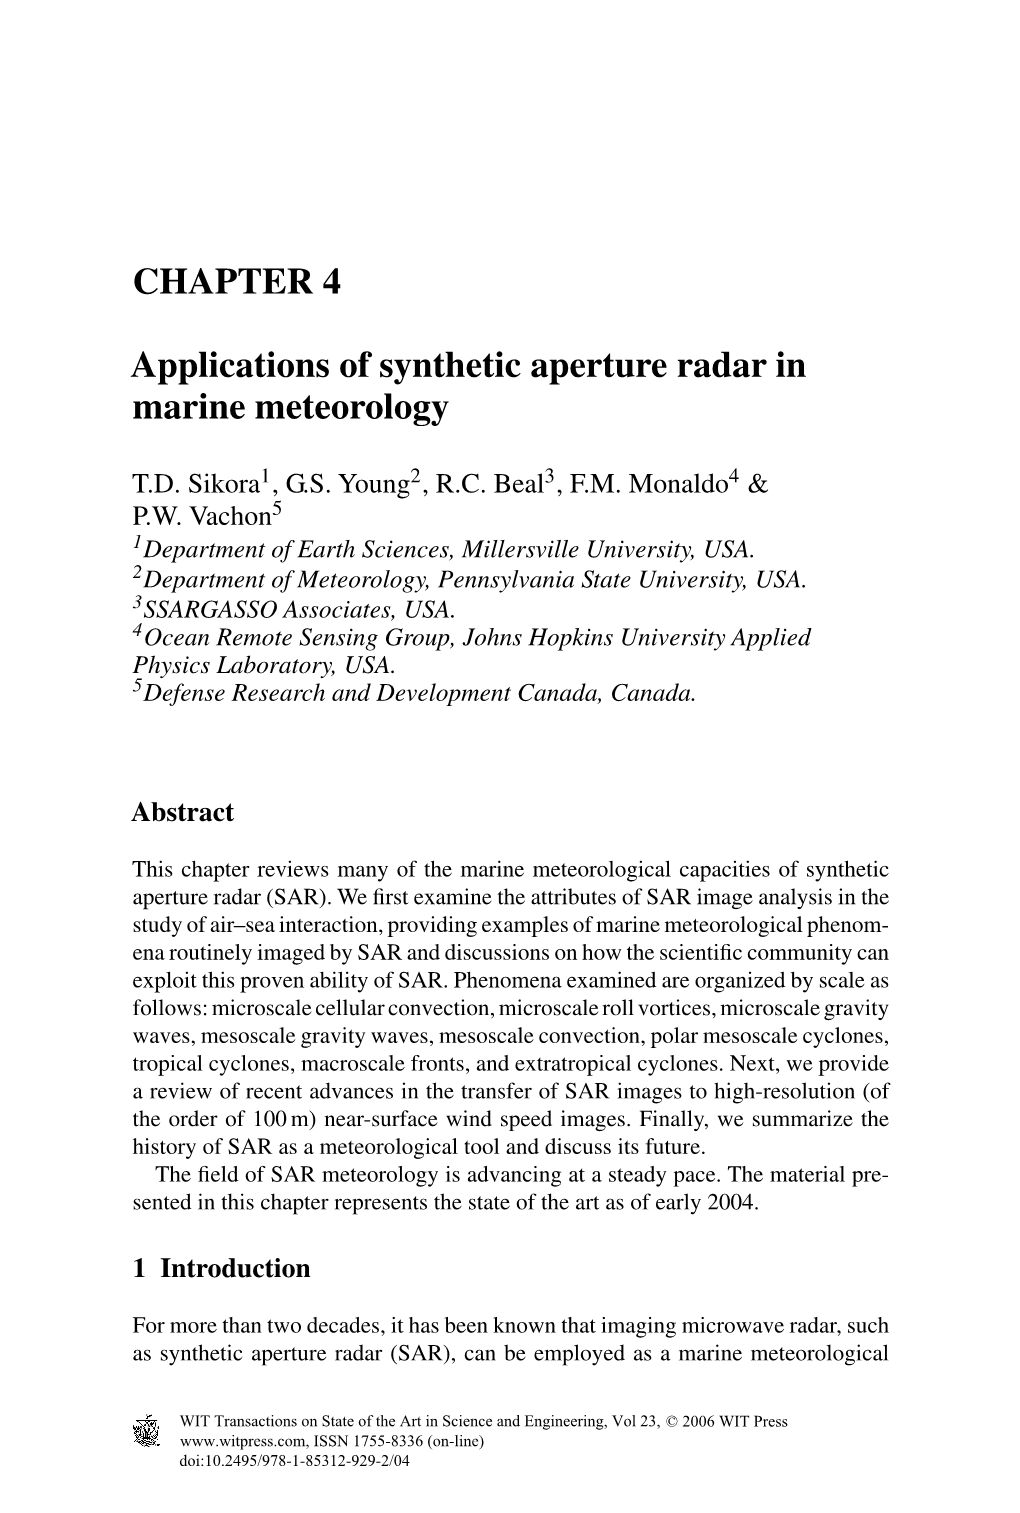 CHAPTER 4 Applications of Synthetic Aperture Radar in Marine Meteorology